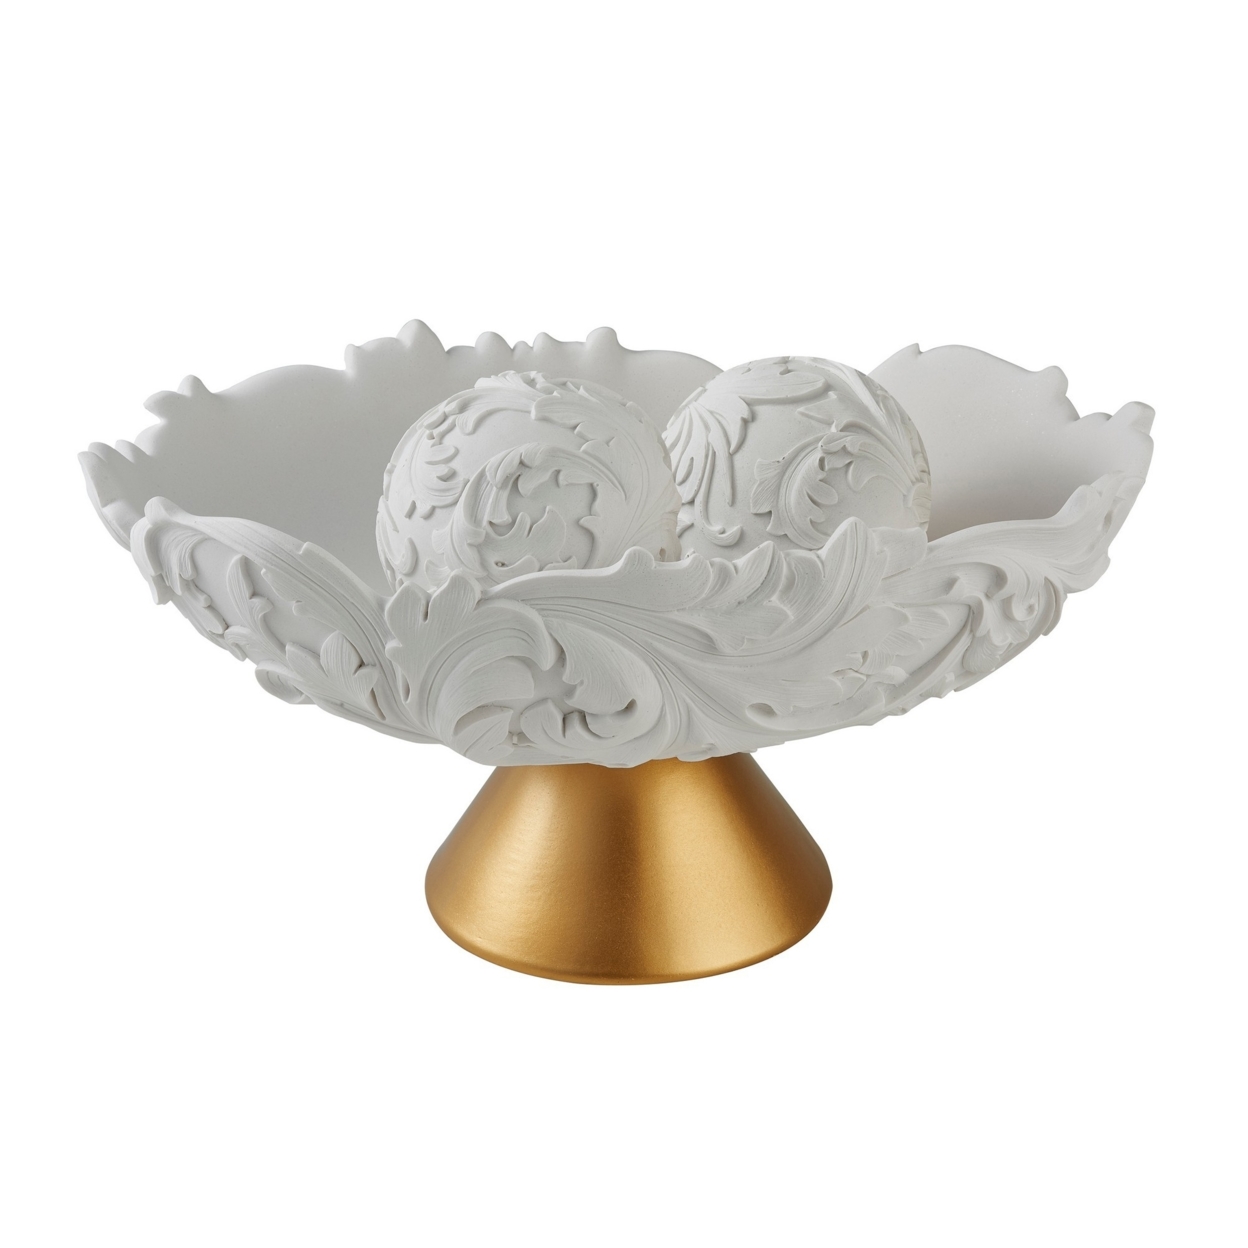 Bowl With Baroque Scroll Design With 2 Spheres, White- Saltoro Sherpi